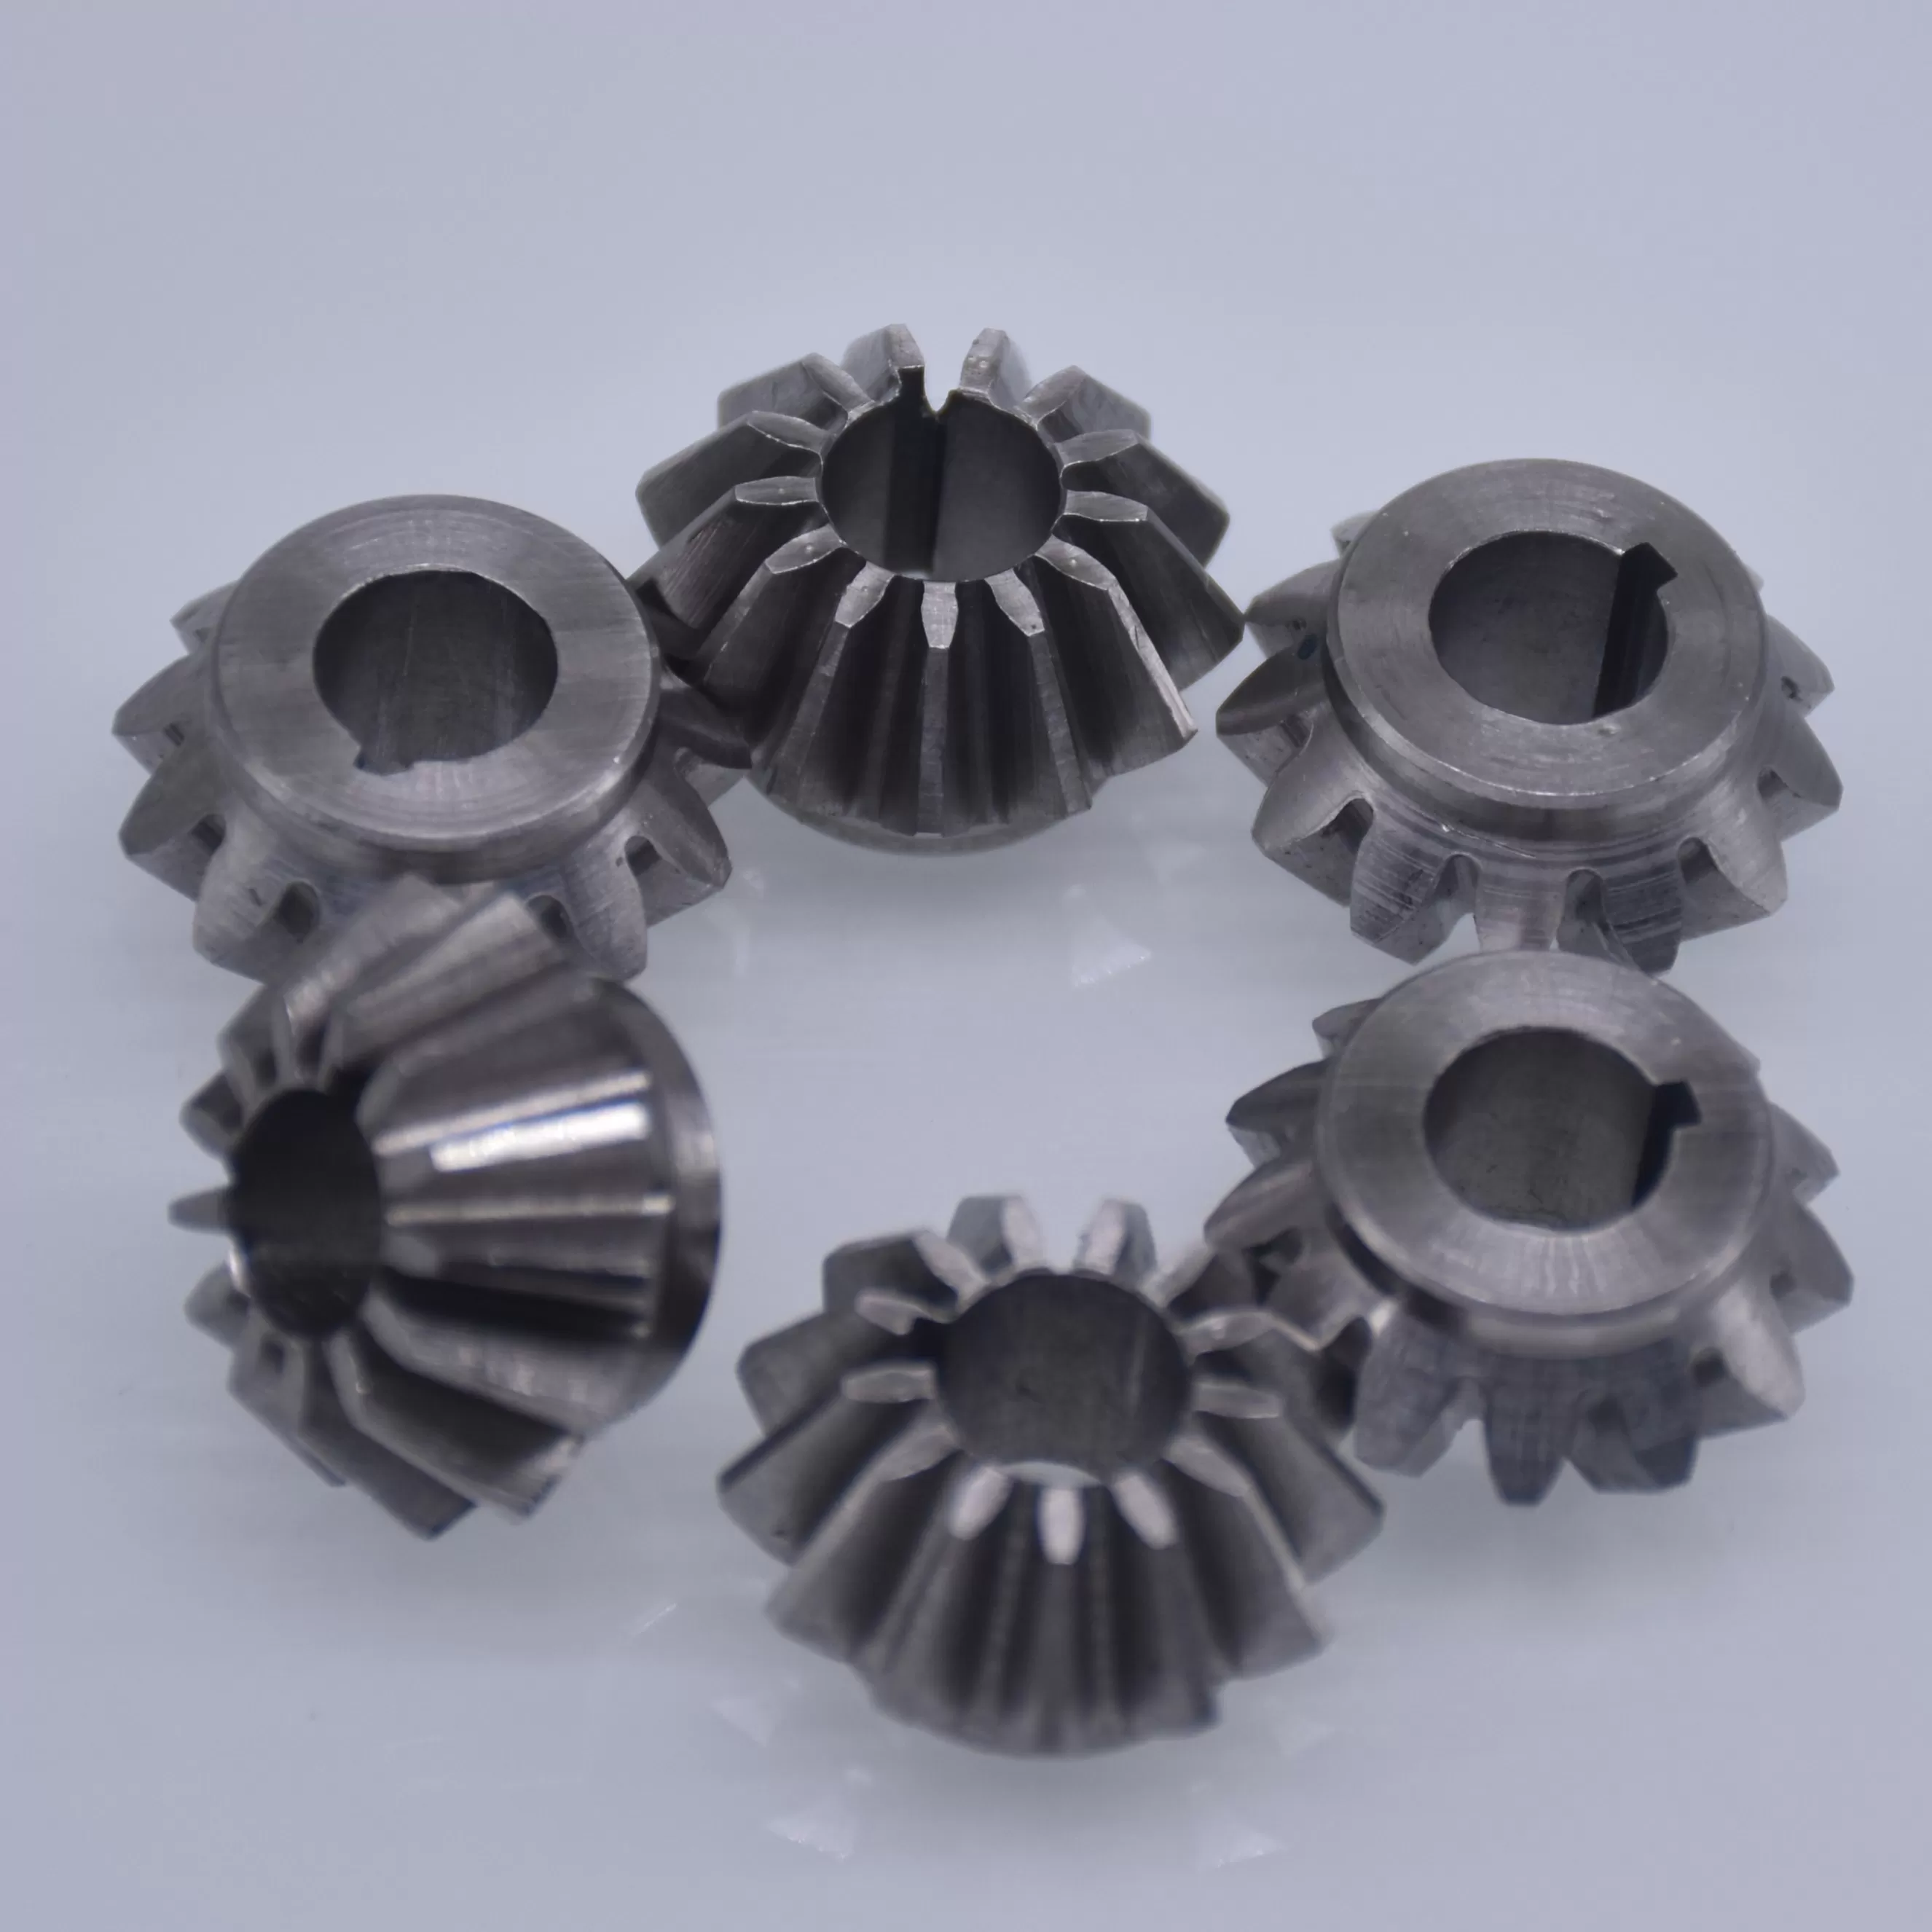 CNC Turning stainless steel 304 gears-